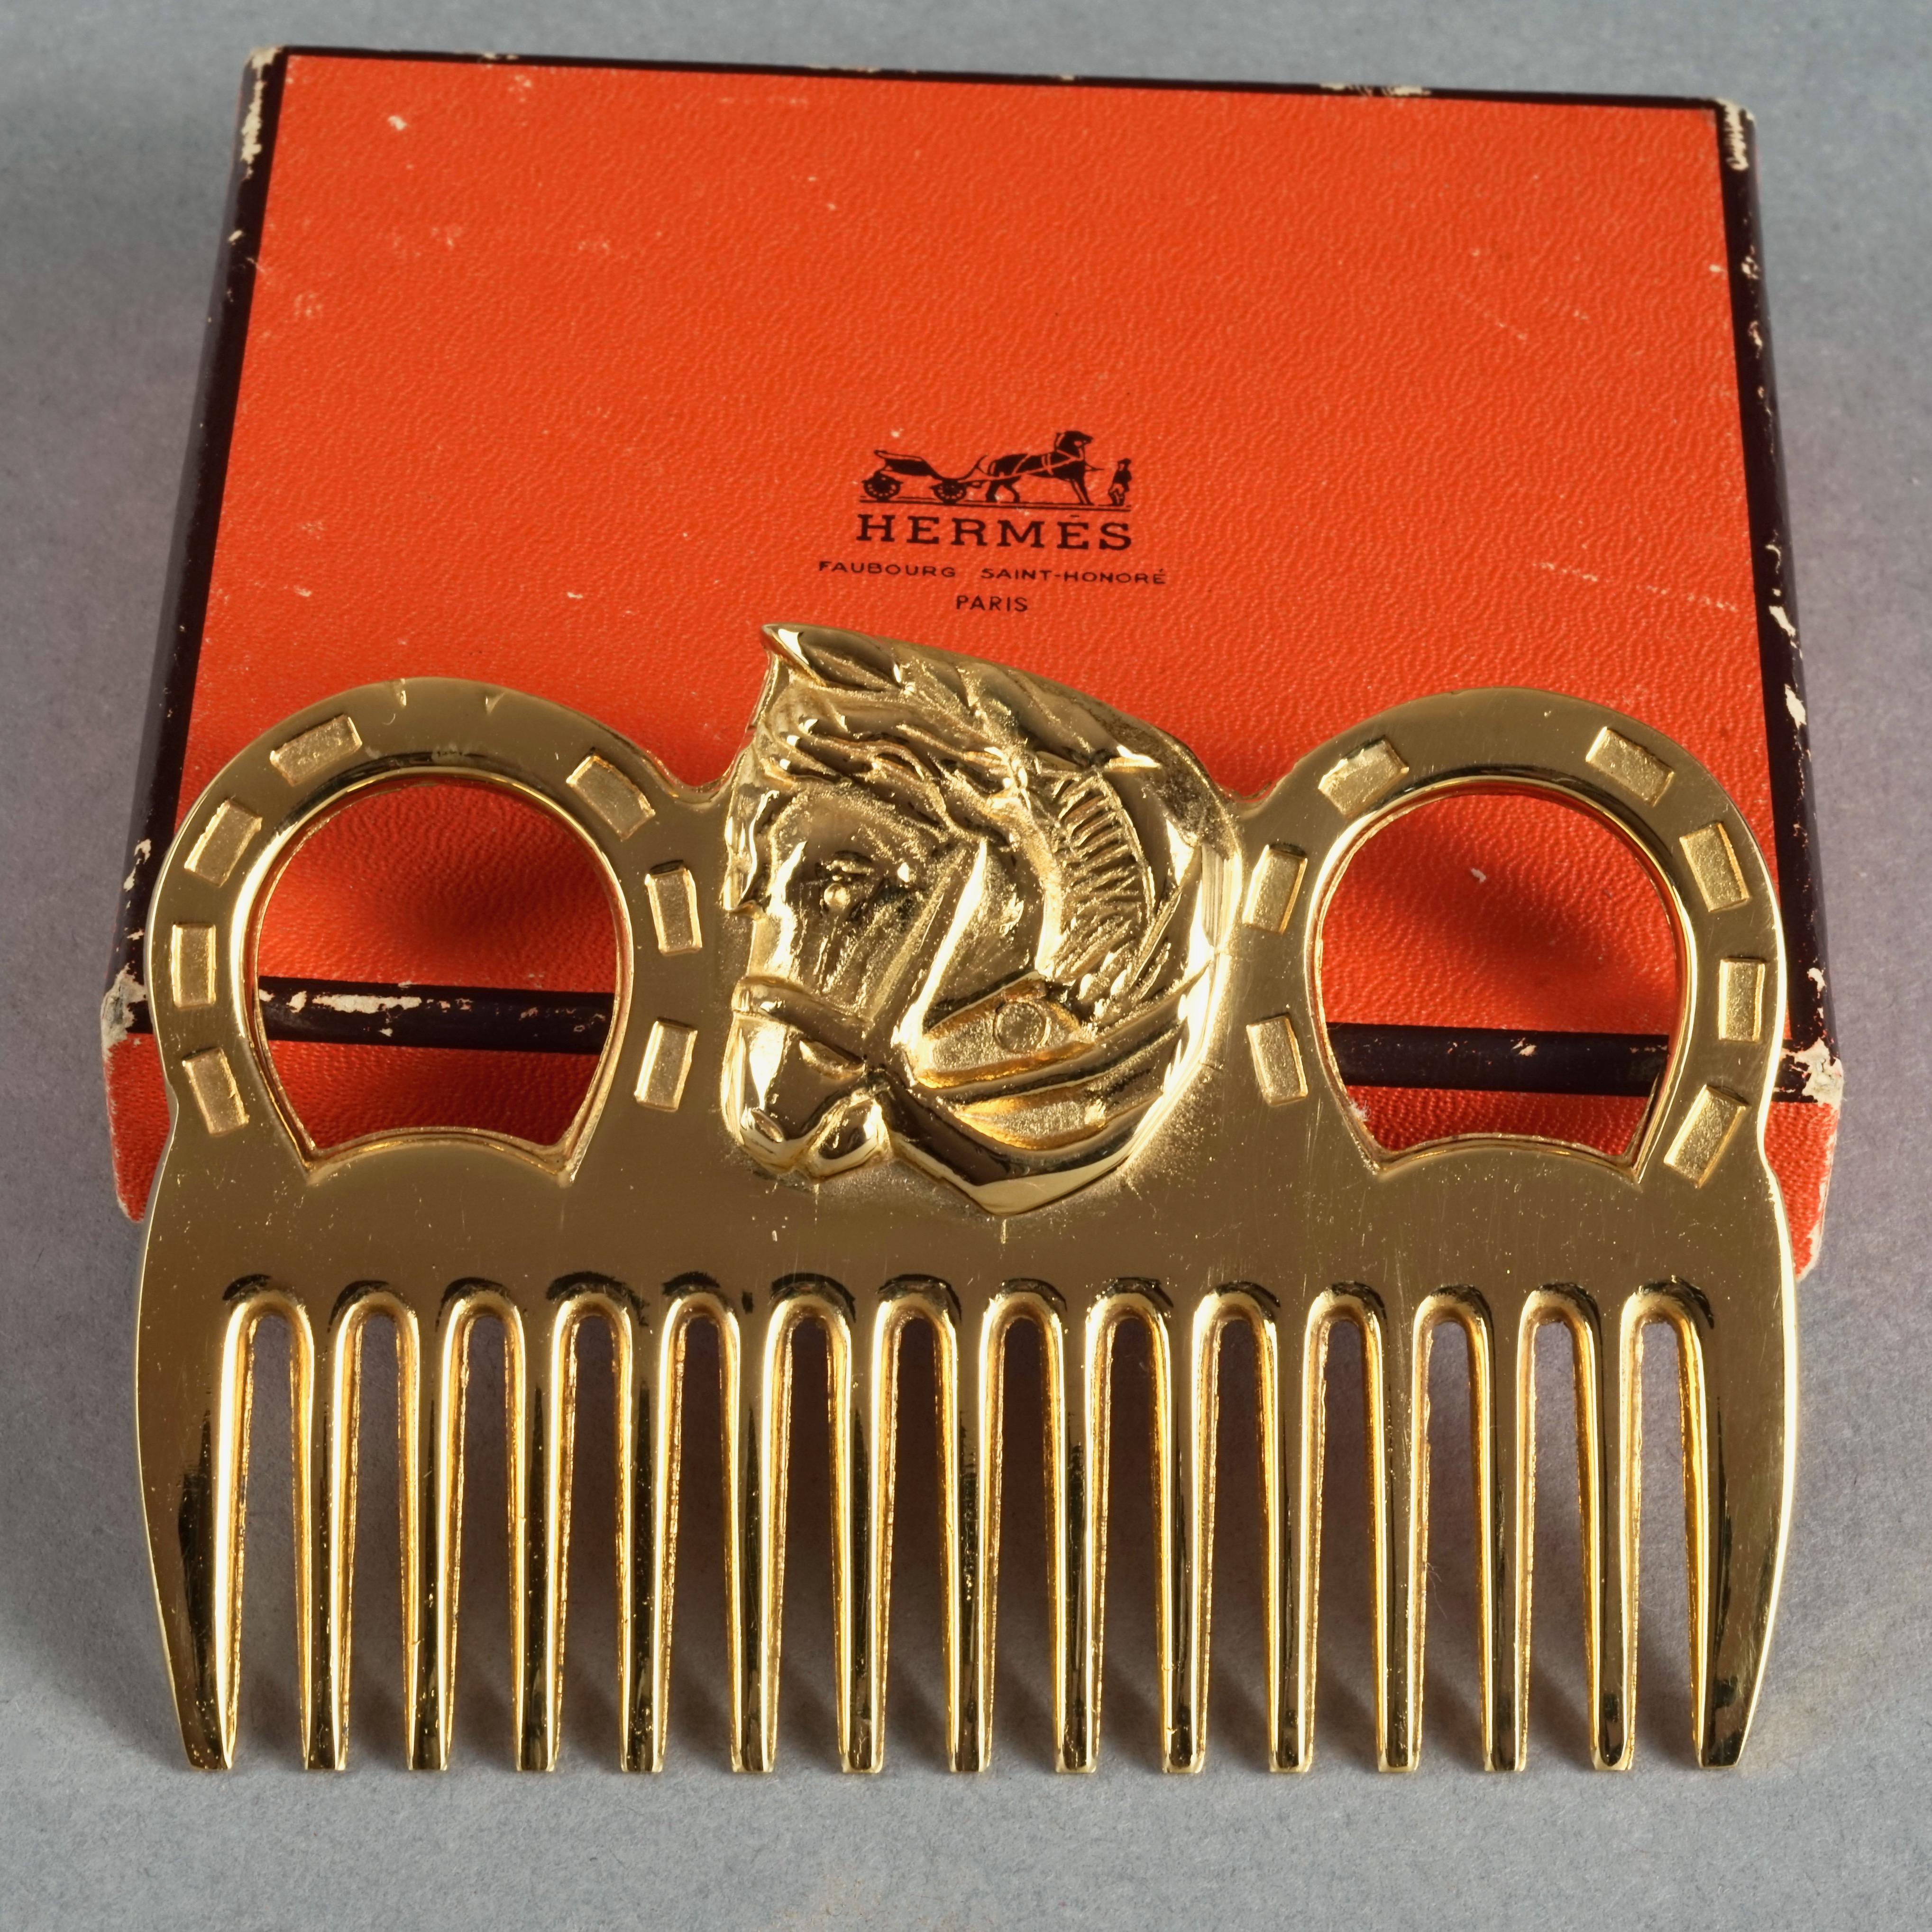 Vintage HERMES Horse Motif Gold Tone Comb 

Measurements:
Height: 2.75 inches (7 cm)
Width: 3.93 inches (10 cm)

Features:
- 100% Authentic HERMES.
- Iconic horse motif comb.
- Gold tone.
- Minor surface scratches.
- Comes with its box.
